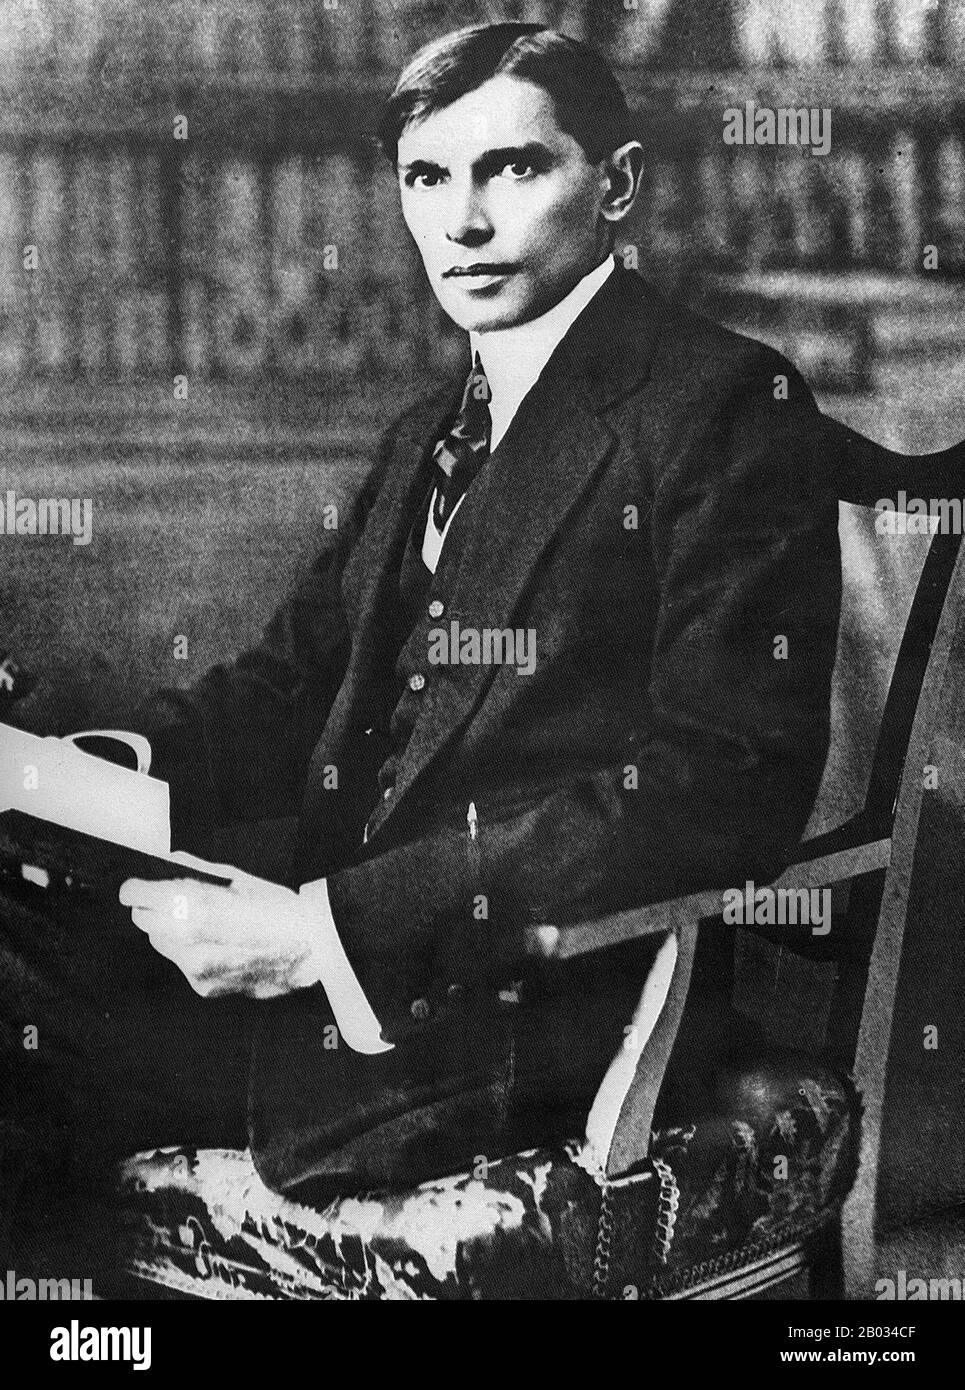 muhammad-ali-jinnah-december-25-1876-september-11-1948-was-a-20th-century-lawyer-politician-statesman-and-the-founder-of-pakistan-he-is-popularly-and-officially-known-in-pakistan-as-quaid-e-azam-great-leader-jinnah-died-aged-71-in-september-1948-just-over-a-year-after-pakistan-gained-independence-from-the-british-empire-2B034CF.jpg